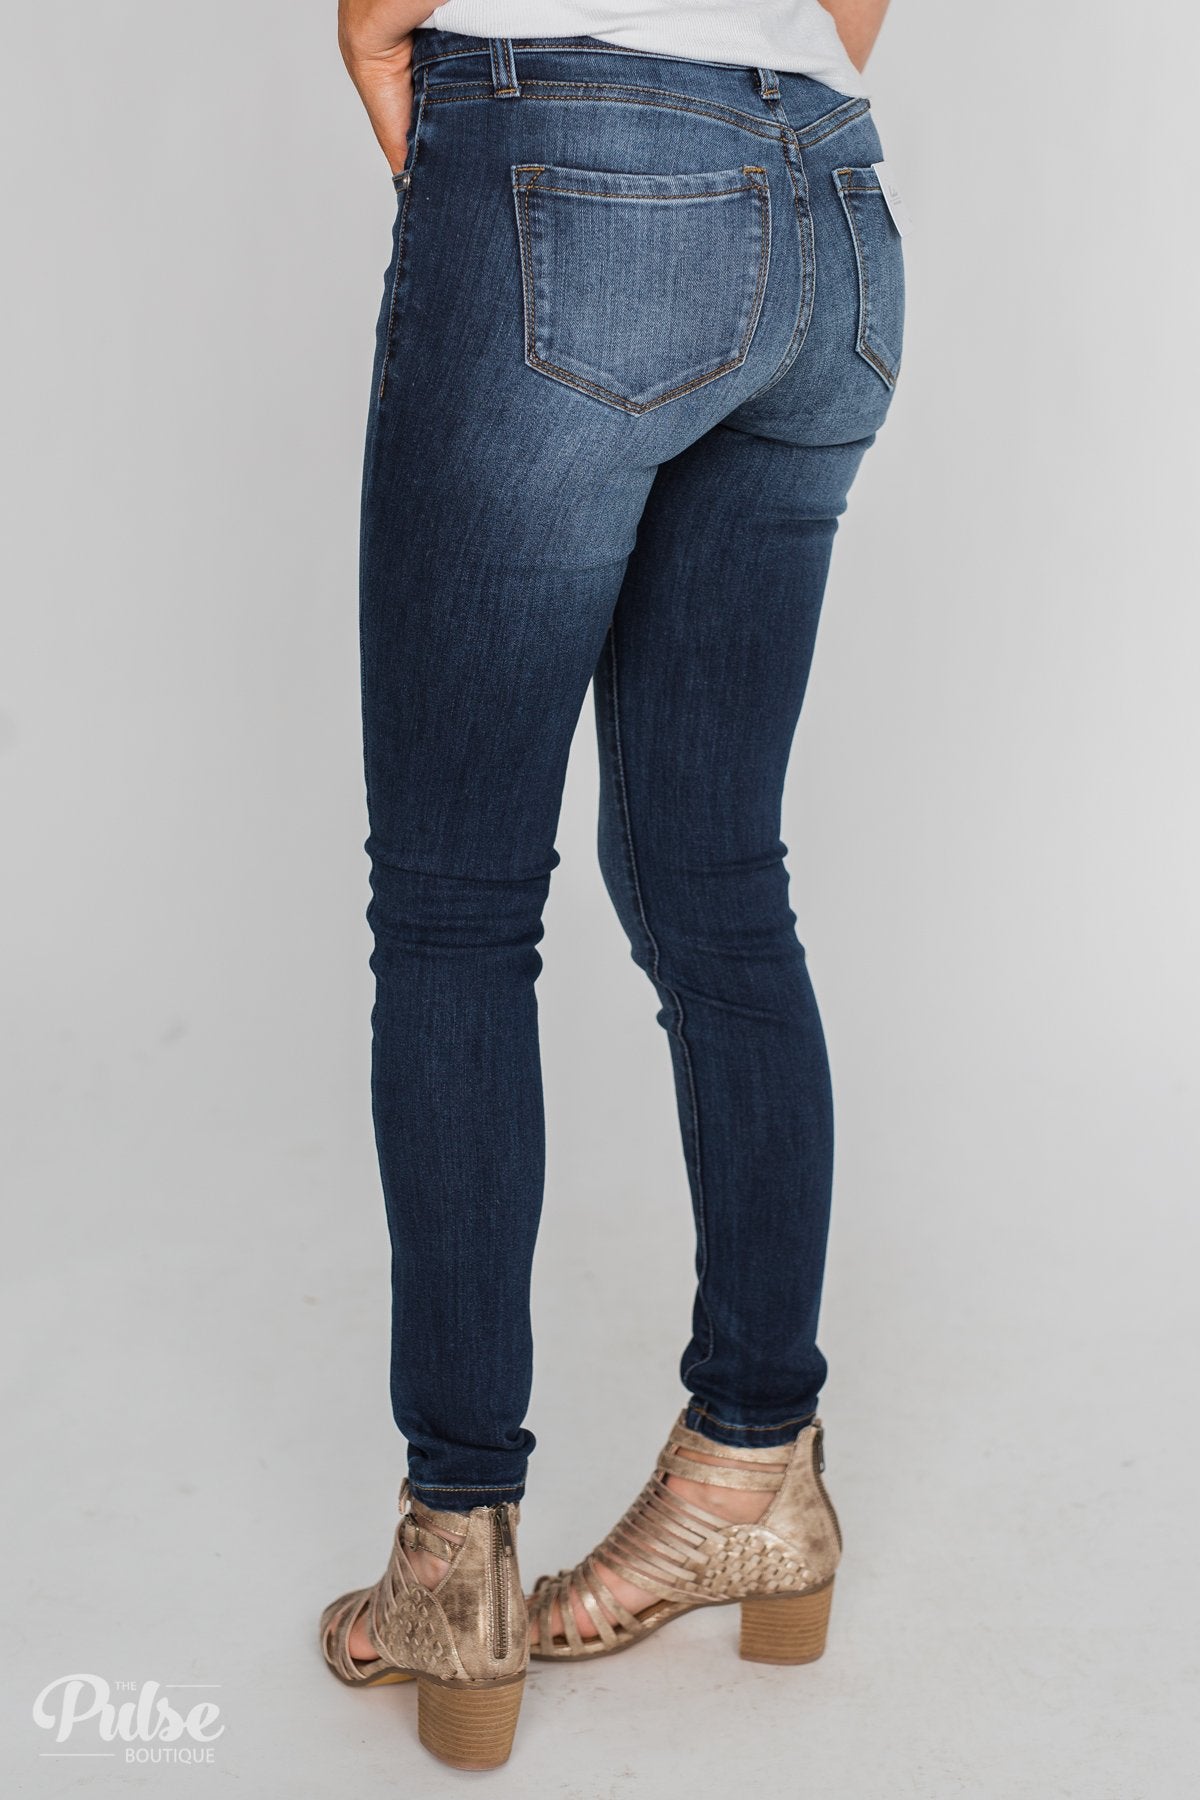 KanCan Jeans- Molly Wash